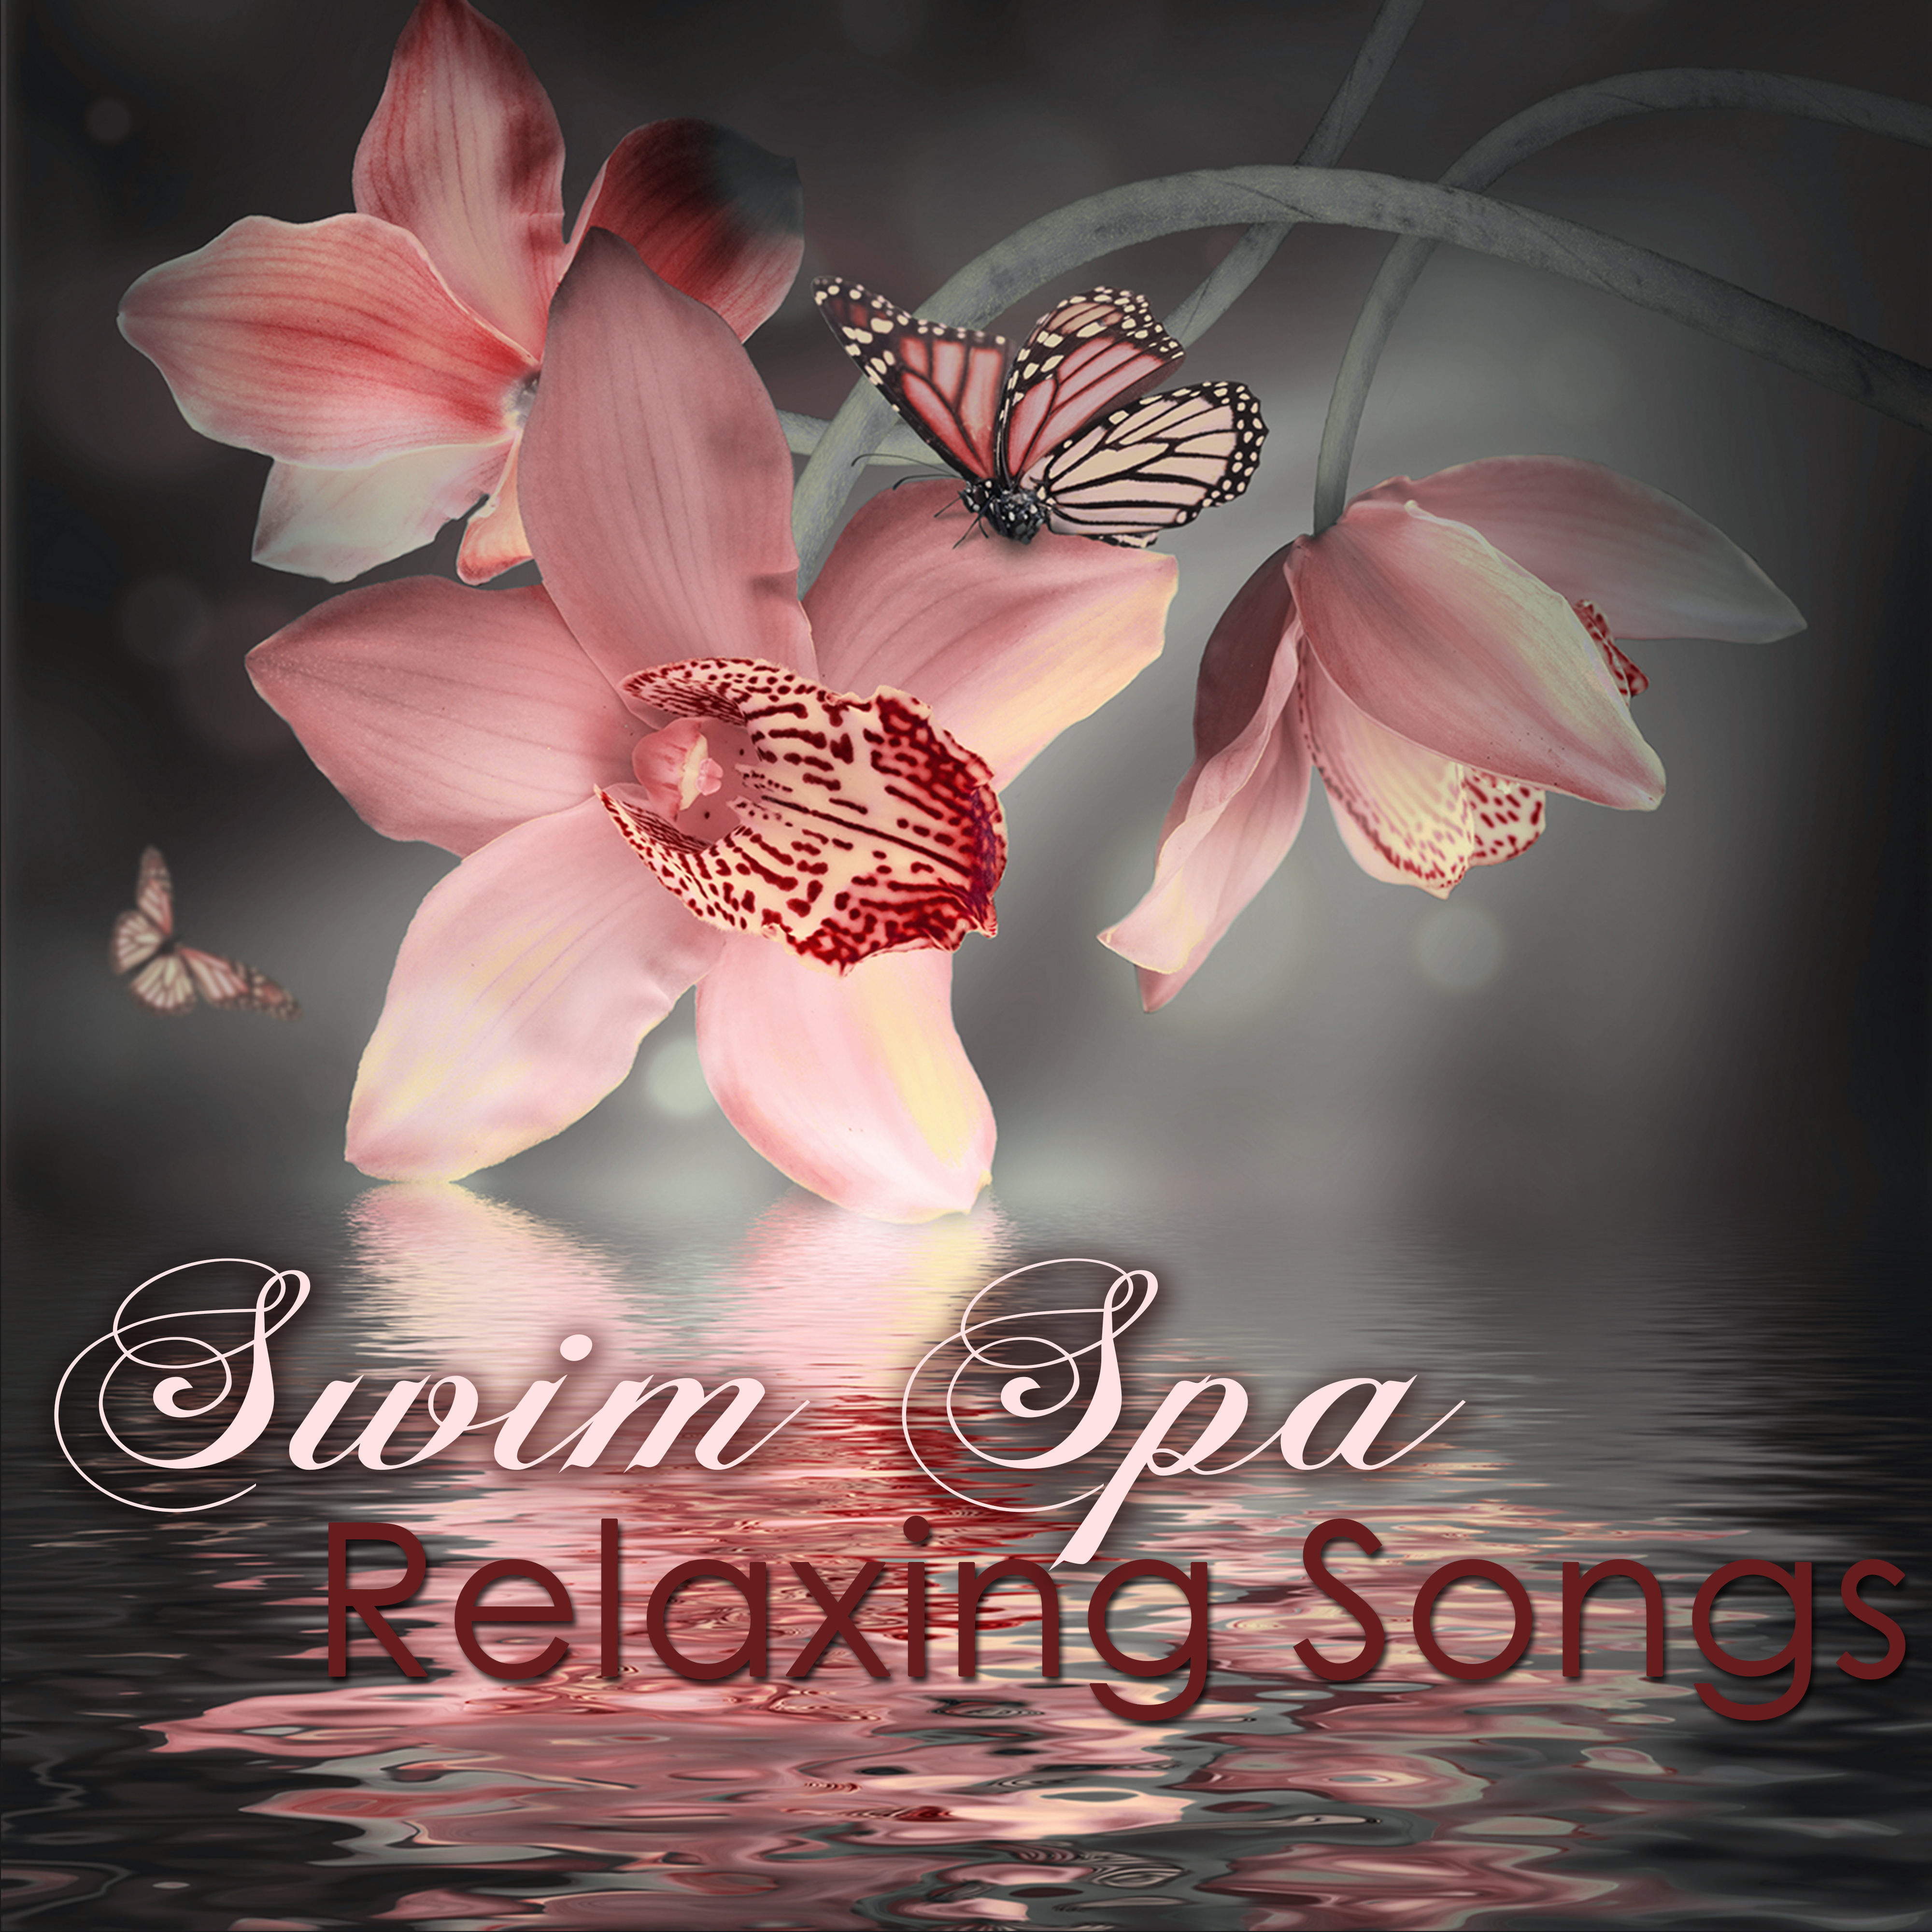 Swim Spa Relaxing Songs – Soothing Music for Rebirthing, Water Spa, Bath & Massage